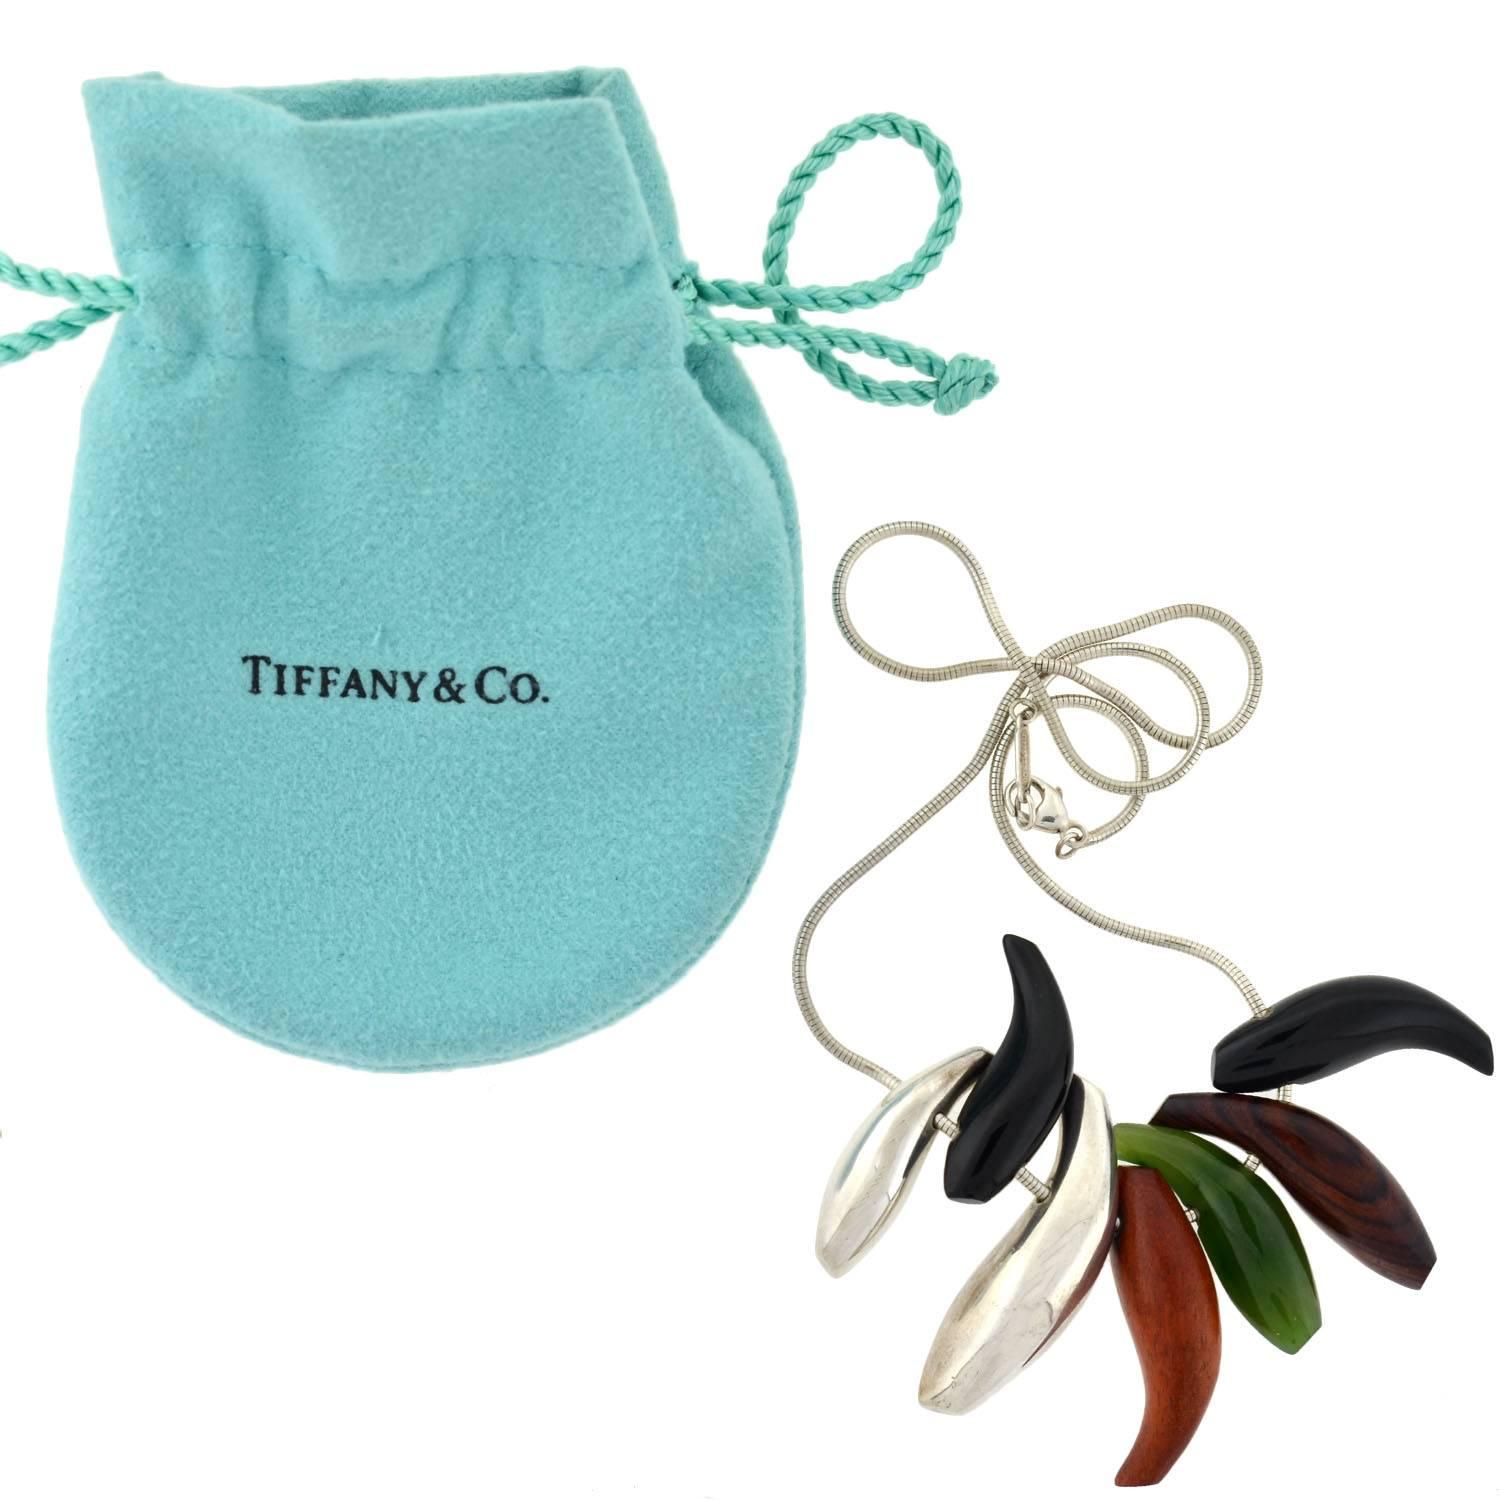 Contemporary Tiffany & Co. Frank Gehry Seven Fish Necklace